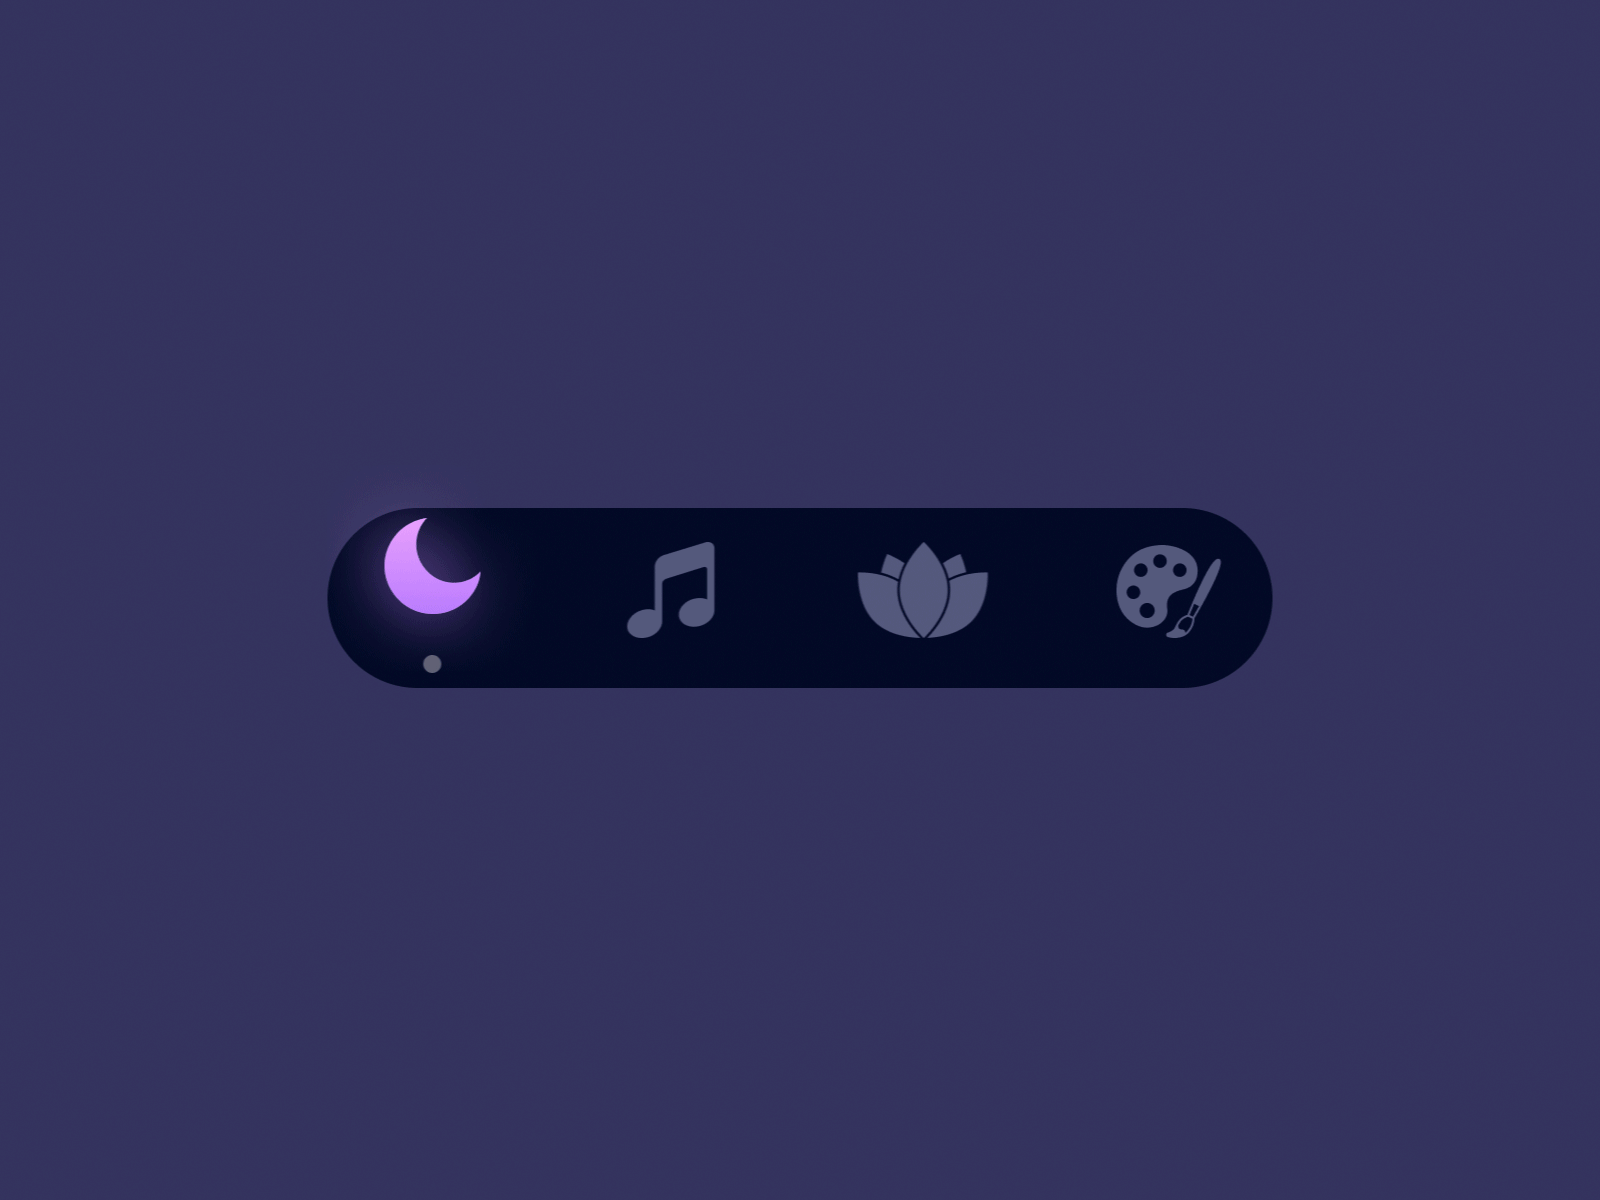 Animated icons in the tabbar animated icons animated tabbar animation app design art icons logo mobile app mobile app design sleep sound ui wellness